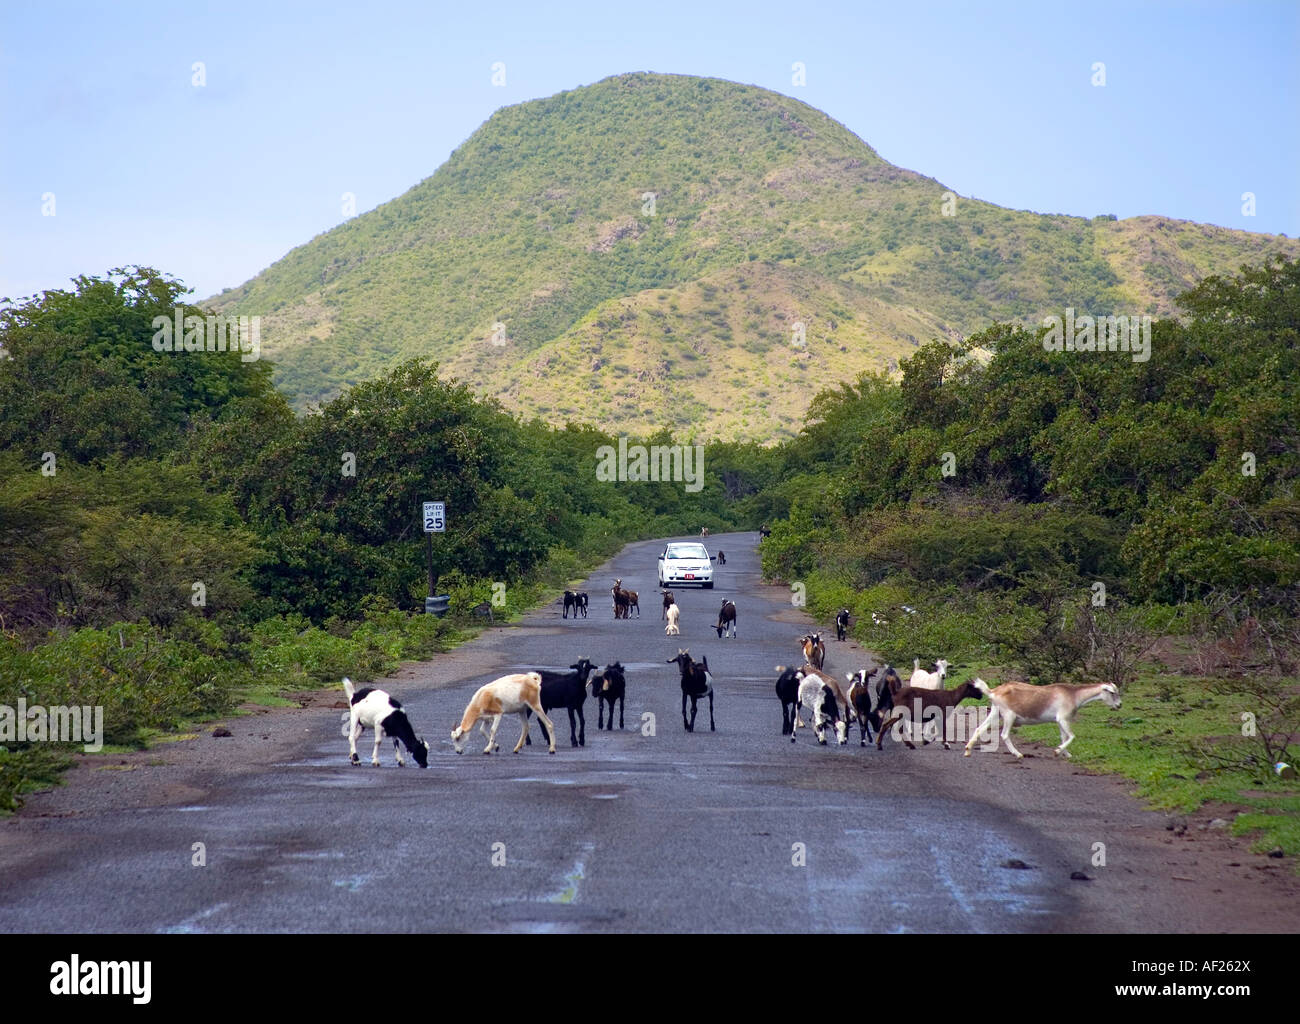 Undeveloped NE coastline of St Kitts in the Caribbean with wild goats and sheep on the road Take care how you drive! Stock Photo